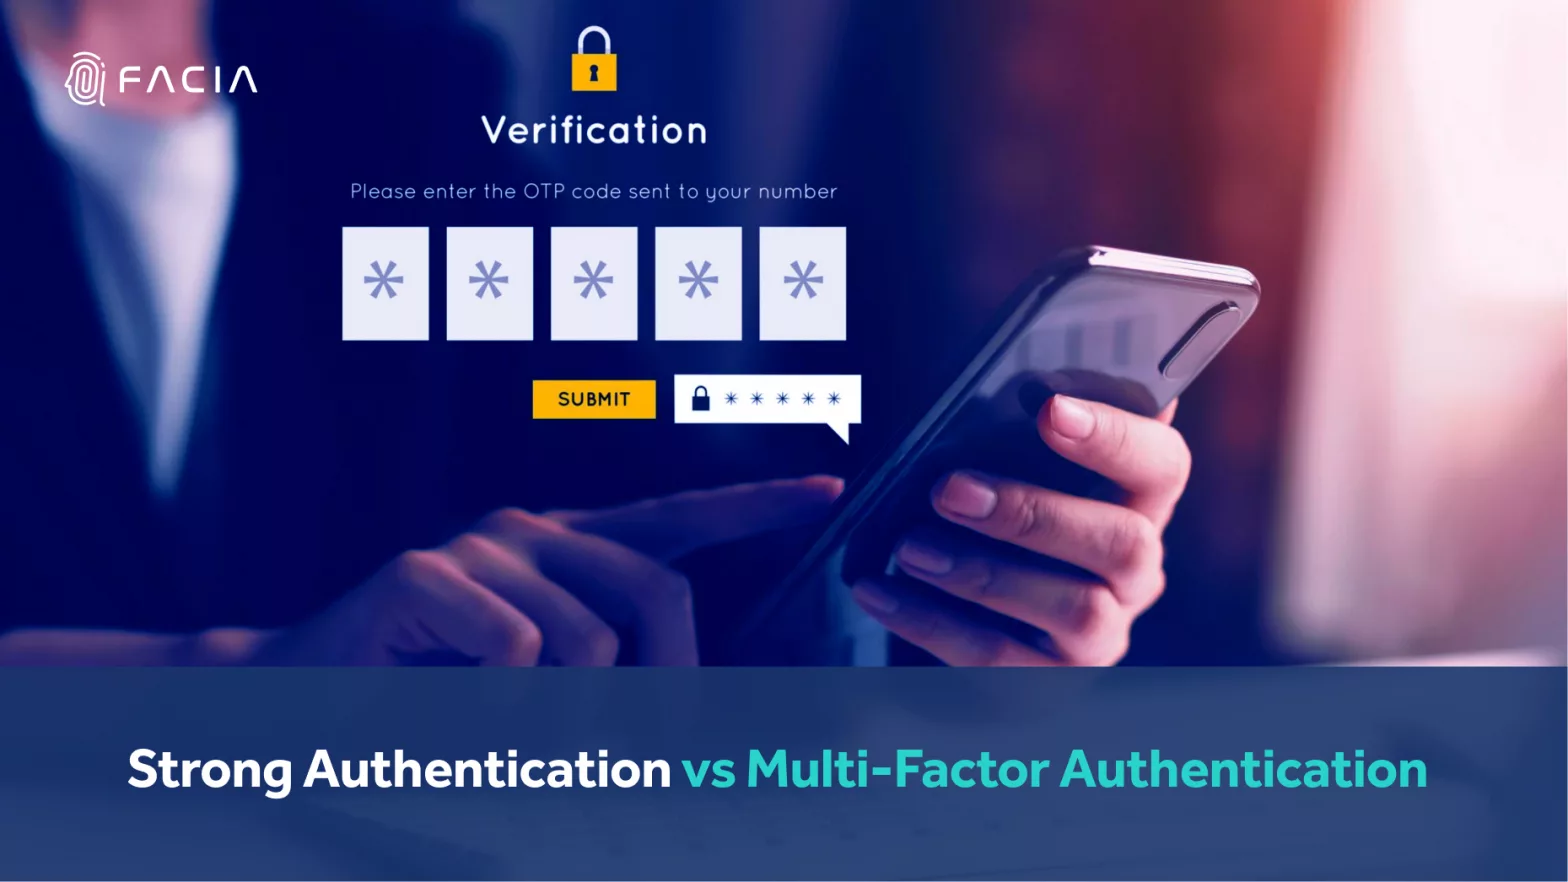 Strong Authentication Vs Multi-Factor